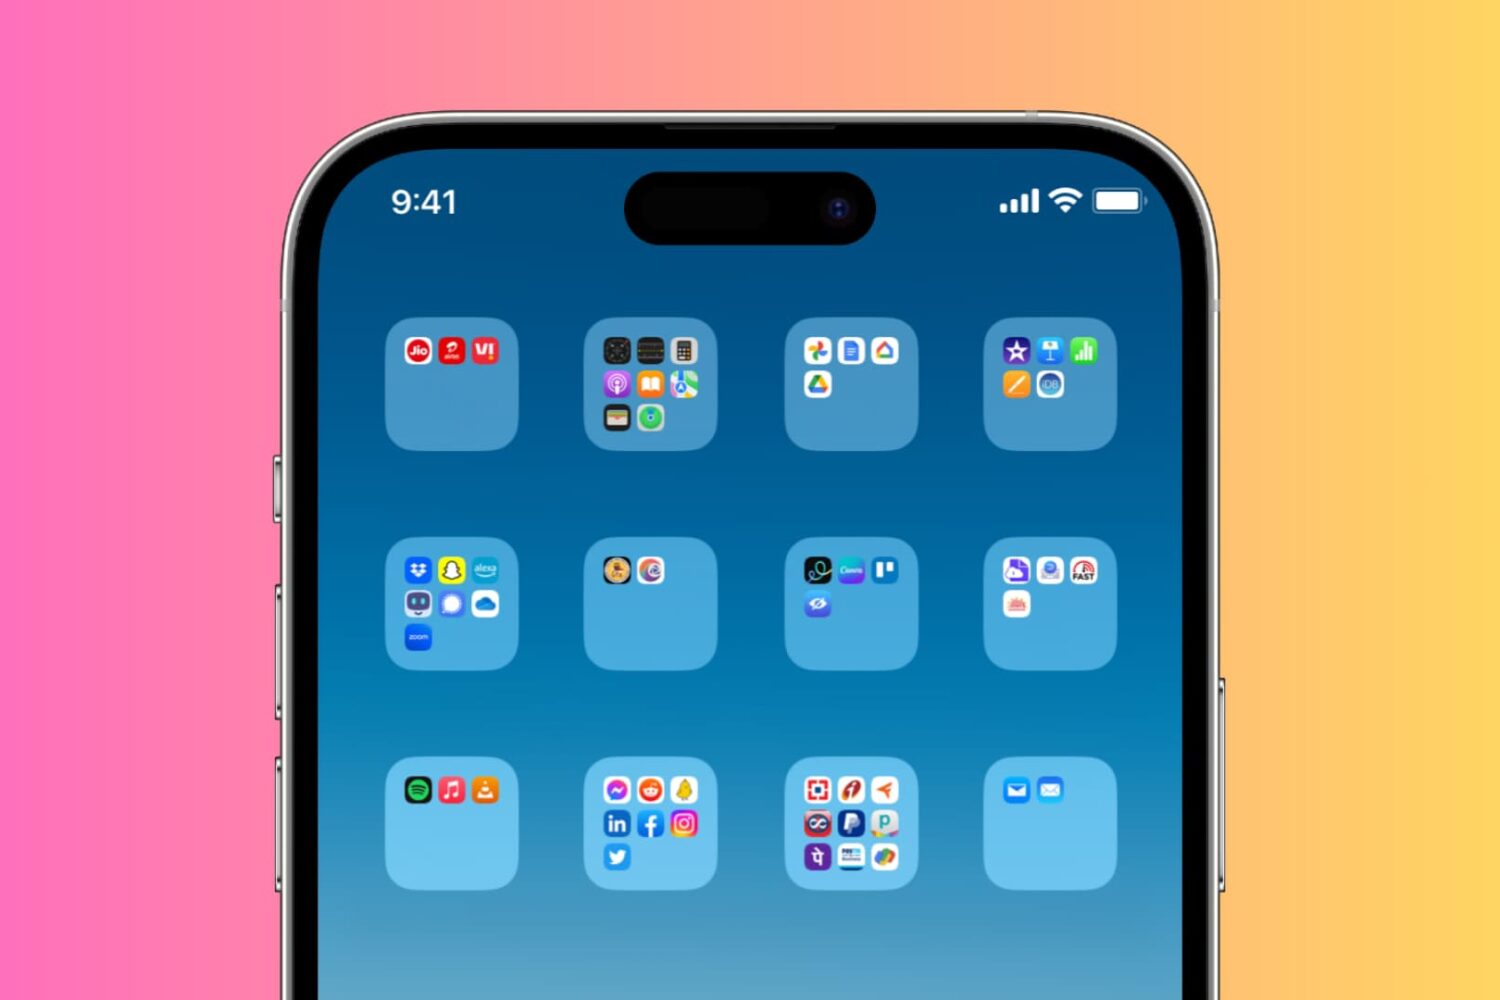 App folders with no name on iPhone Home Screen